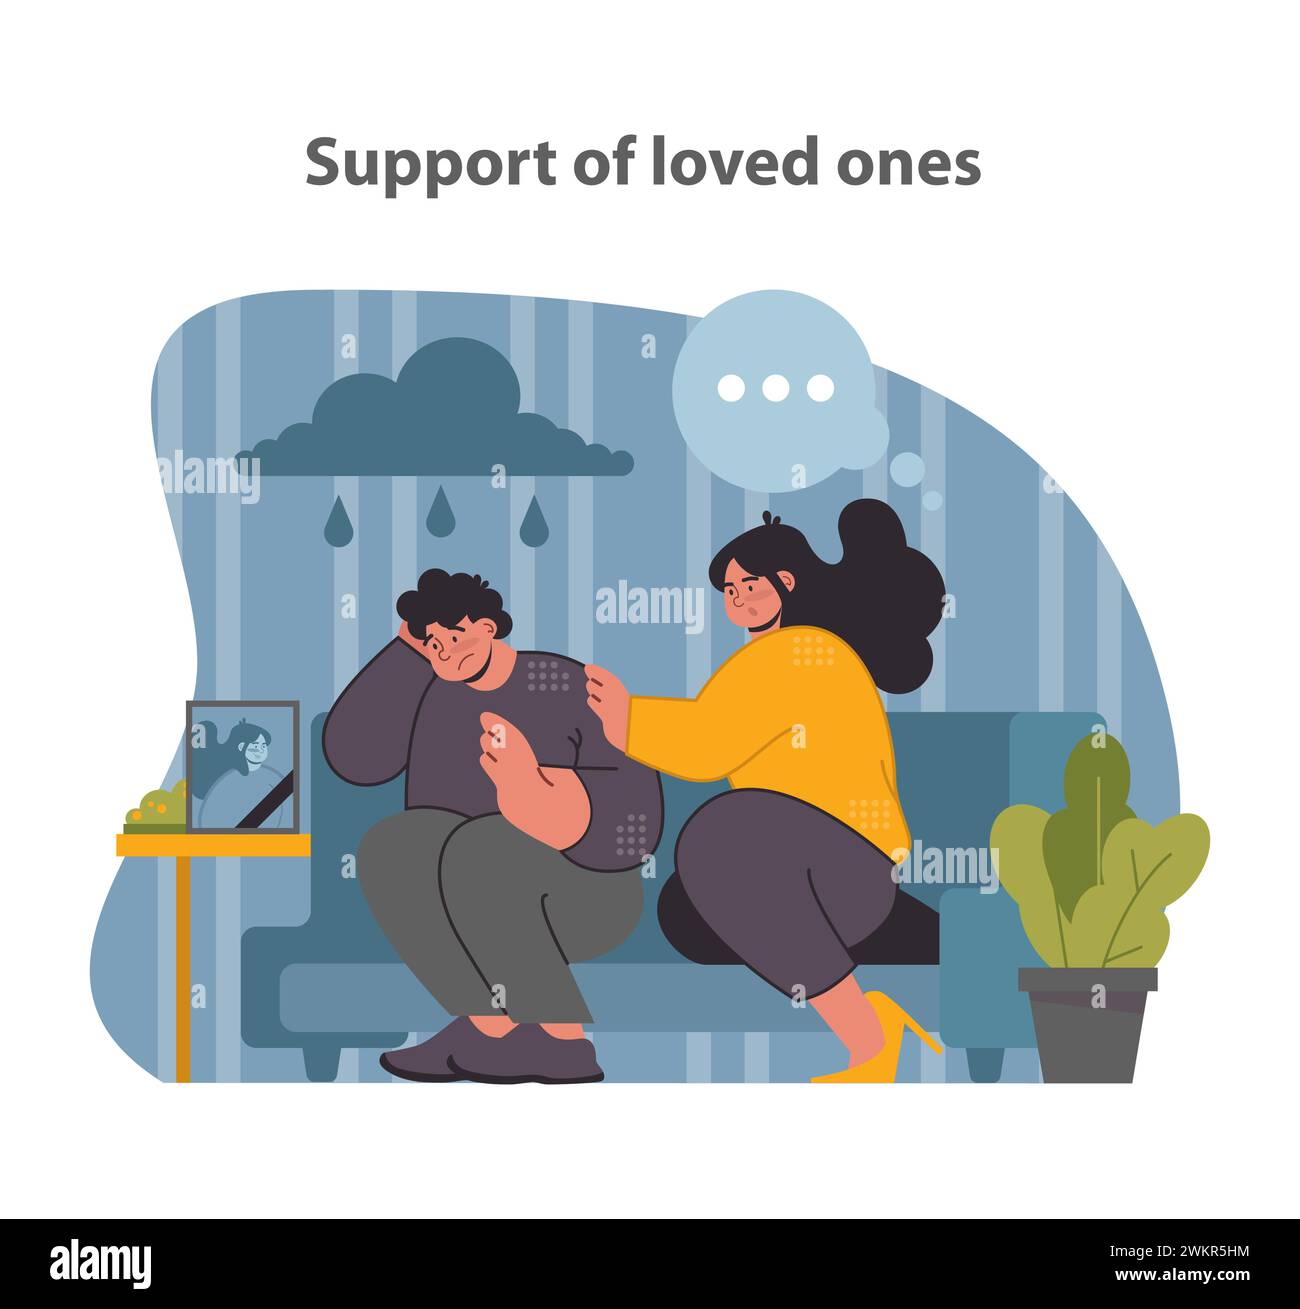 Support in sorrow. A comforting embrace amidst the grief, signifying unwavering familial love and support. Flat vector illustration. Stock Vector